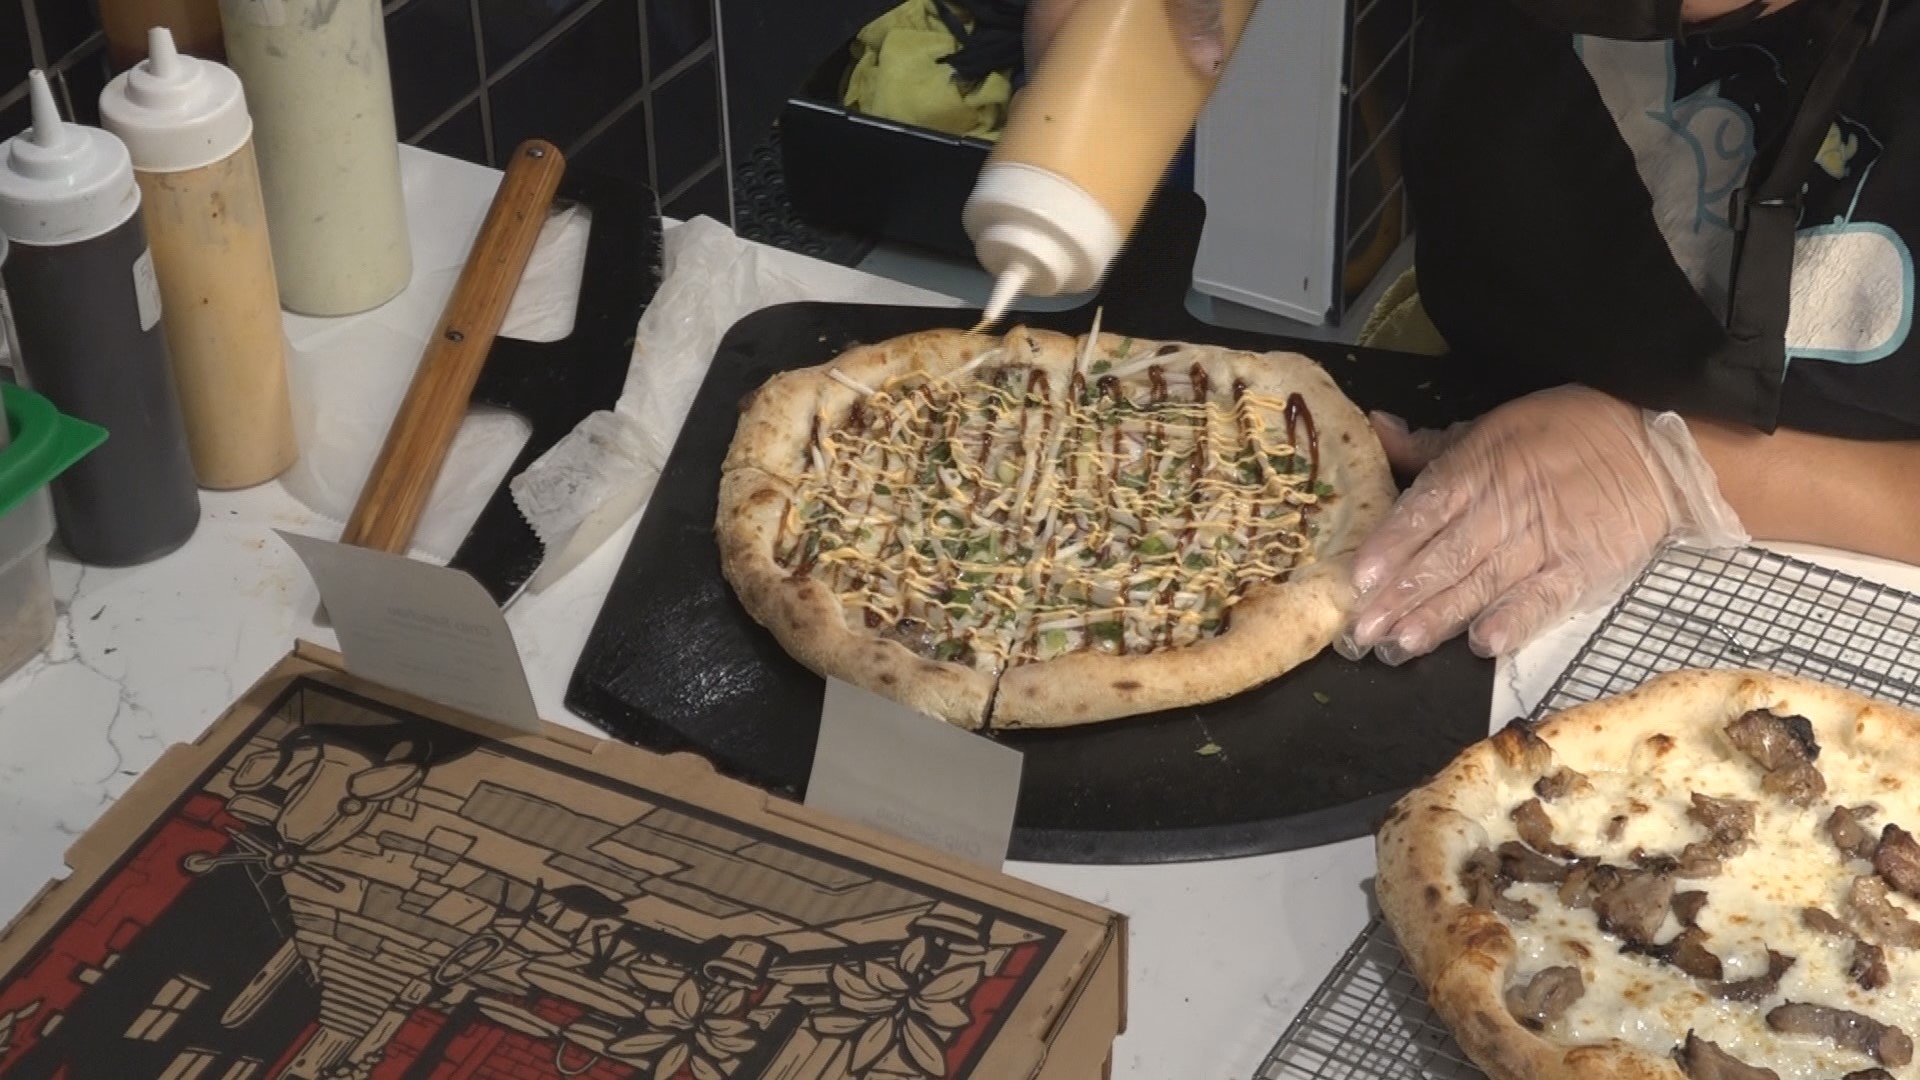 Hapa Pizza in downtown Beaverton blends the flavors of Asian cuisine and traditional Italian pizza. The KGW Sunrise team spoke with the owners and sampled slices.